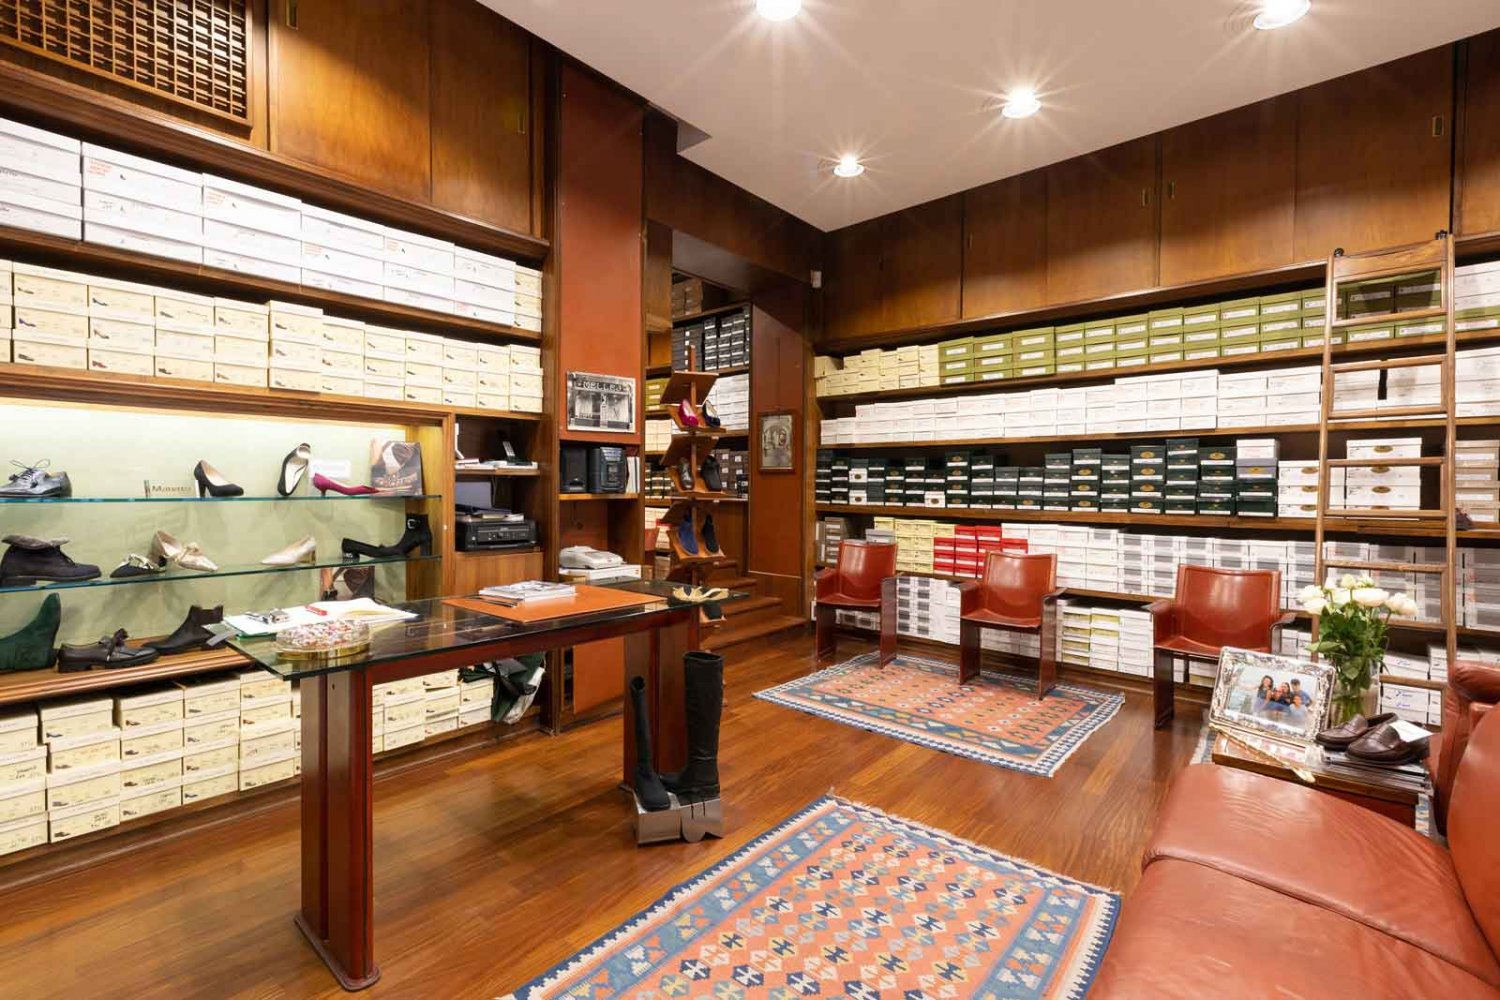 Shopping for Italian Leather Boots: Santo Calzature in Rome - An American  in Rome